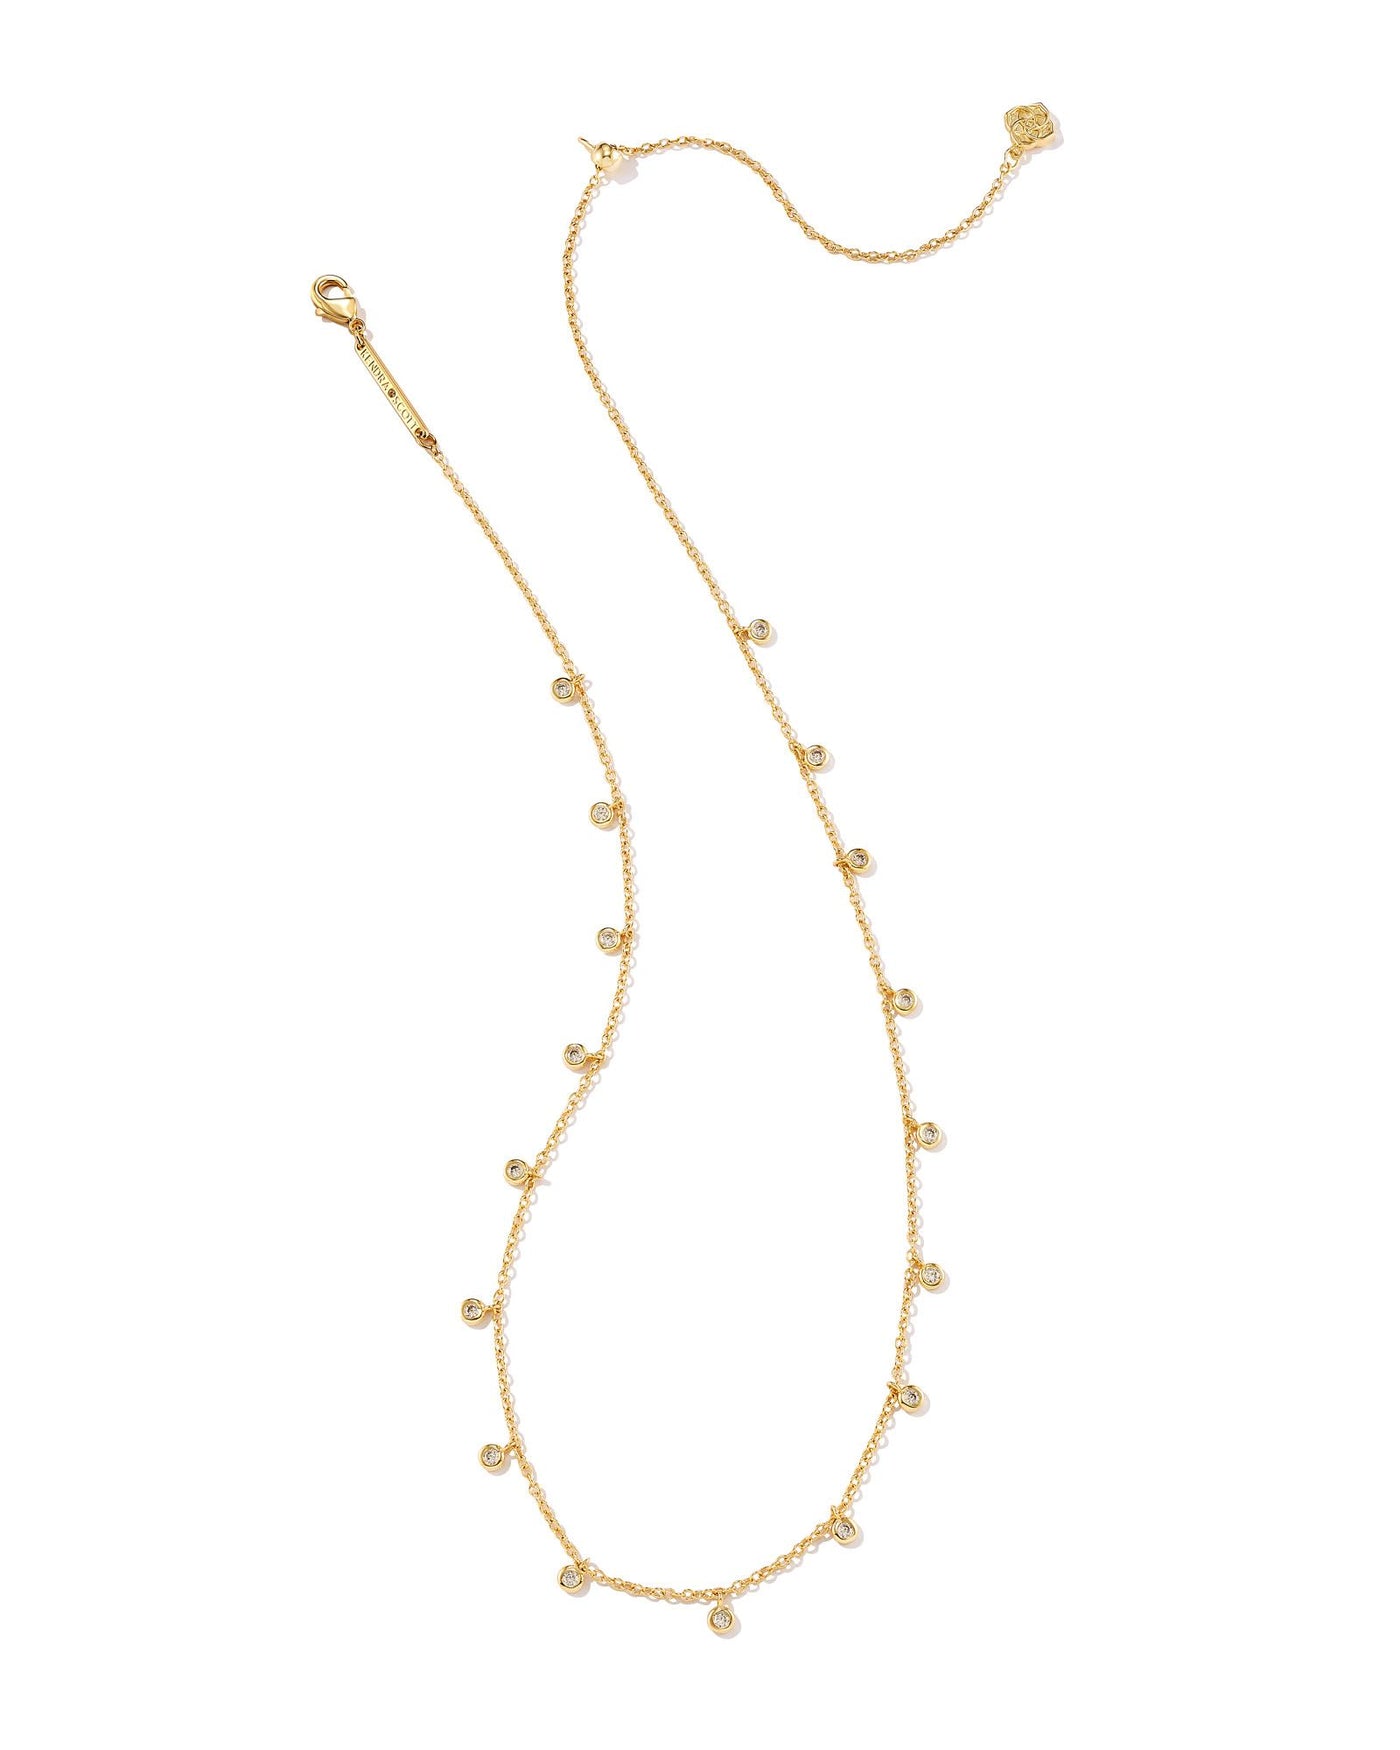 Kendra Scott Amelia Gold Chain Necklace-Necklaces-Kendra Scott-Market Street Nest, Fashionable Clothing, Shoes and Home Décor Located in Mabank, TX